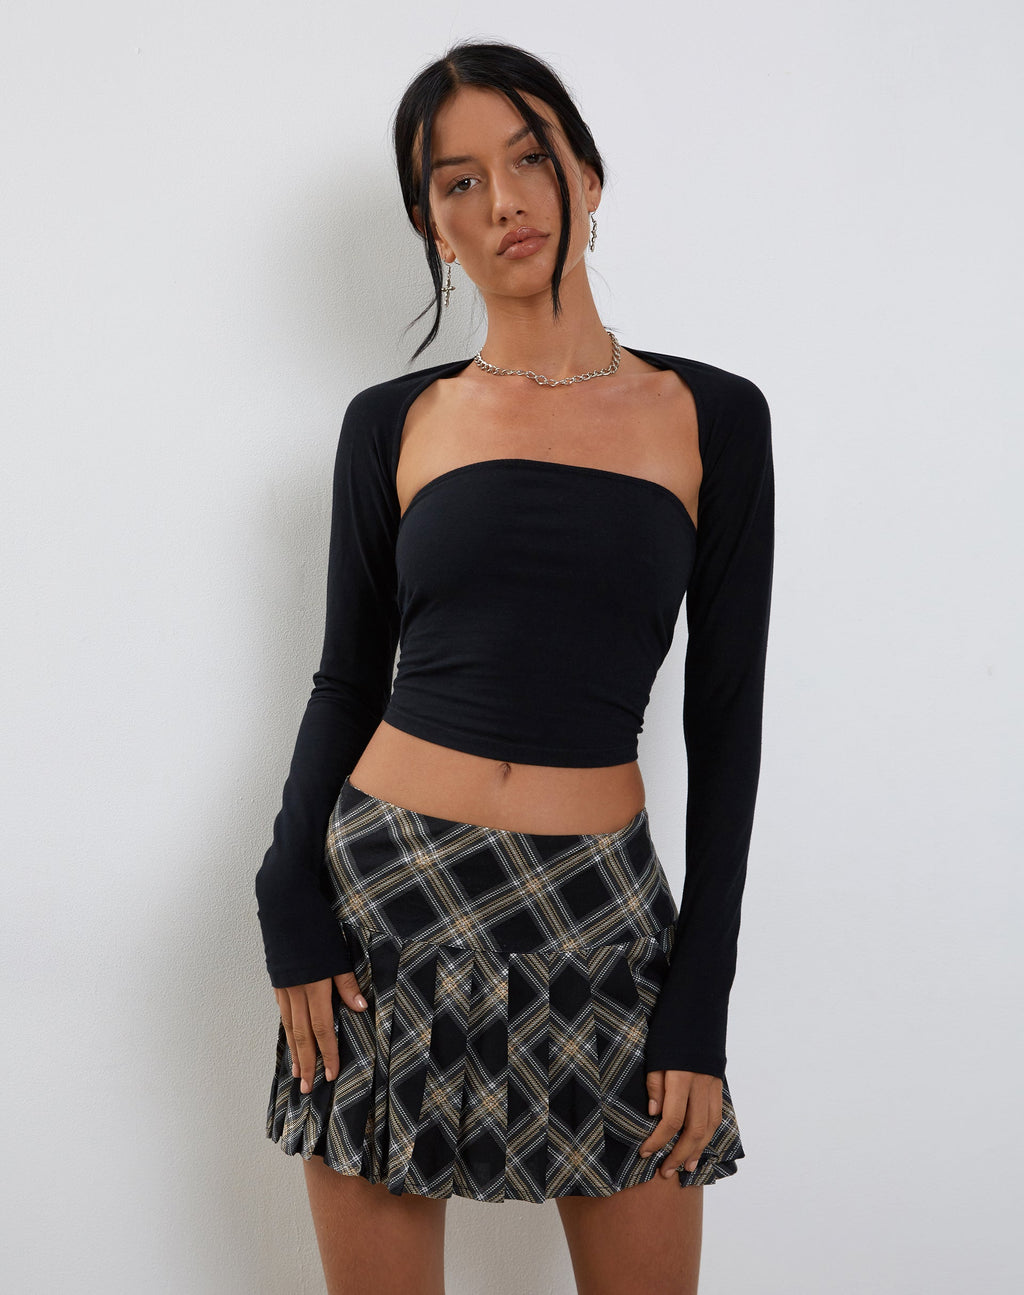 Casini Pleated Micro Skirt in Black and Grey Check